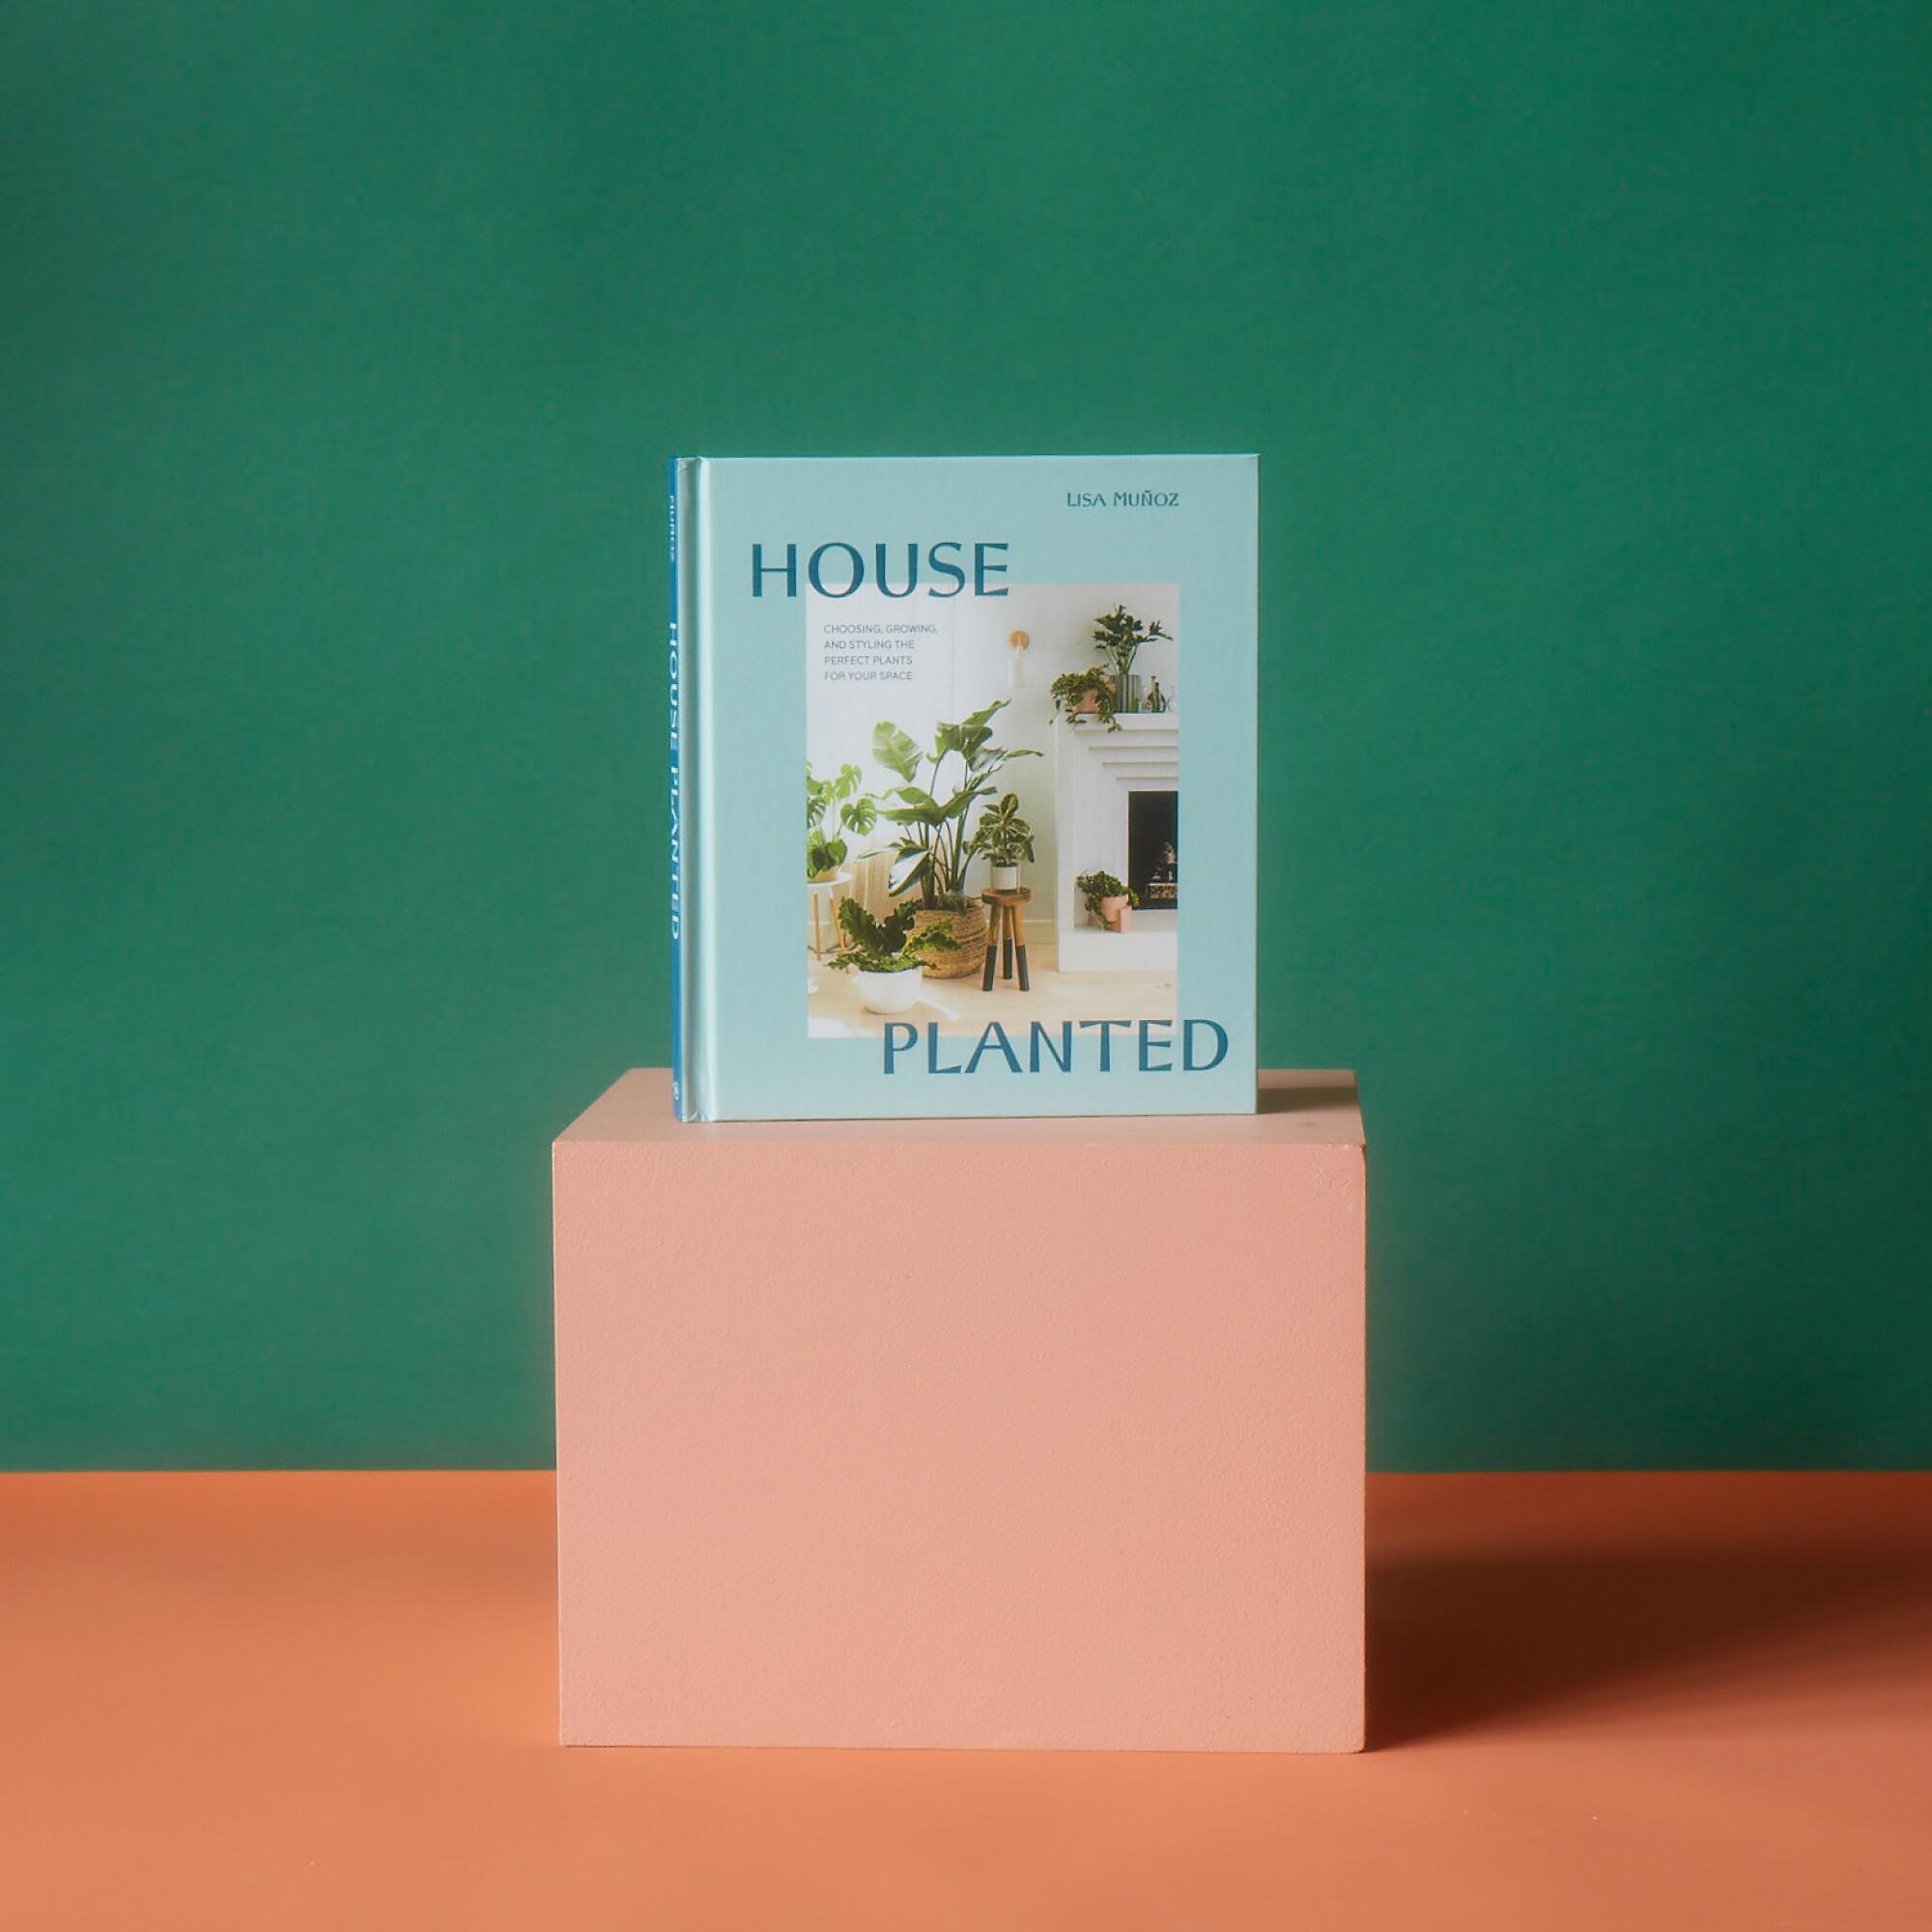 The book "House Planted" sits on a box.